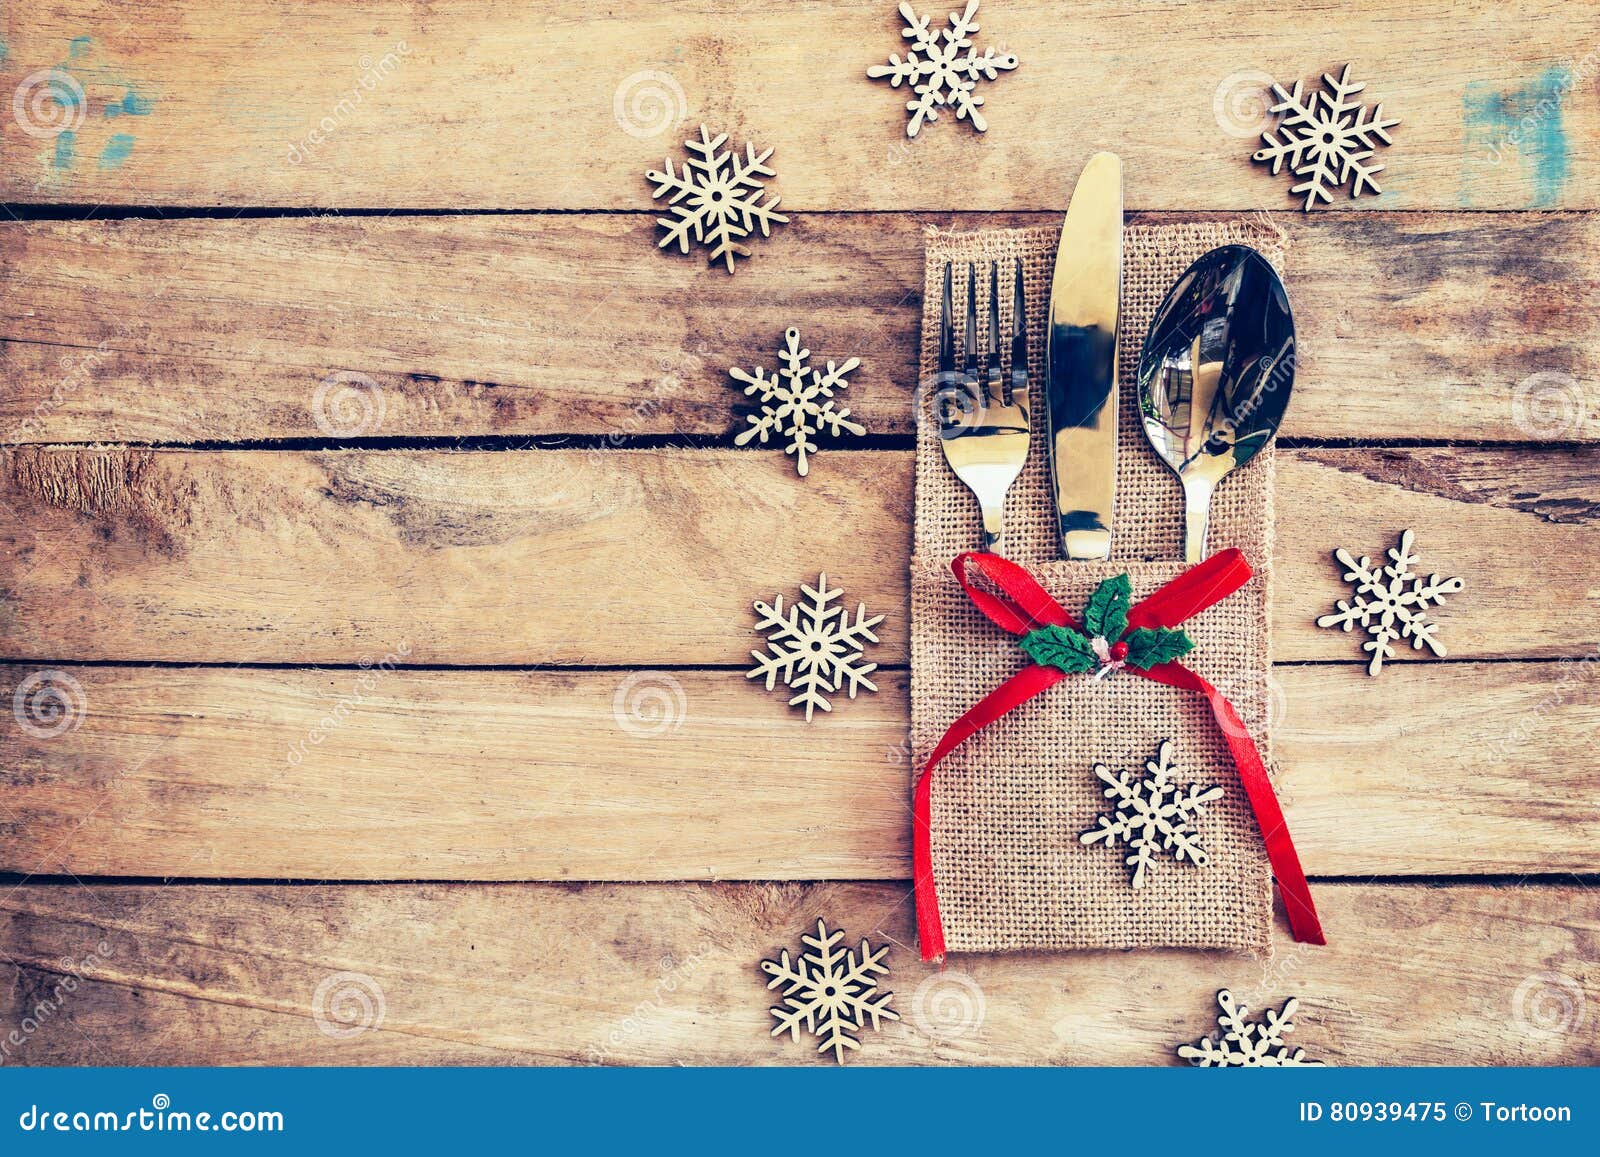 Christmas Table Place Setting and Silverware, Snowflakes on Table ...